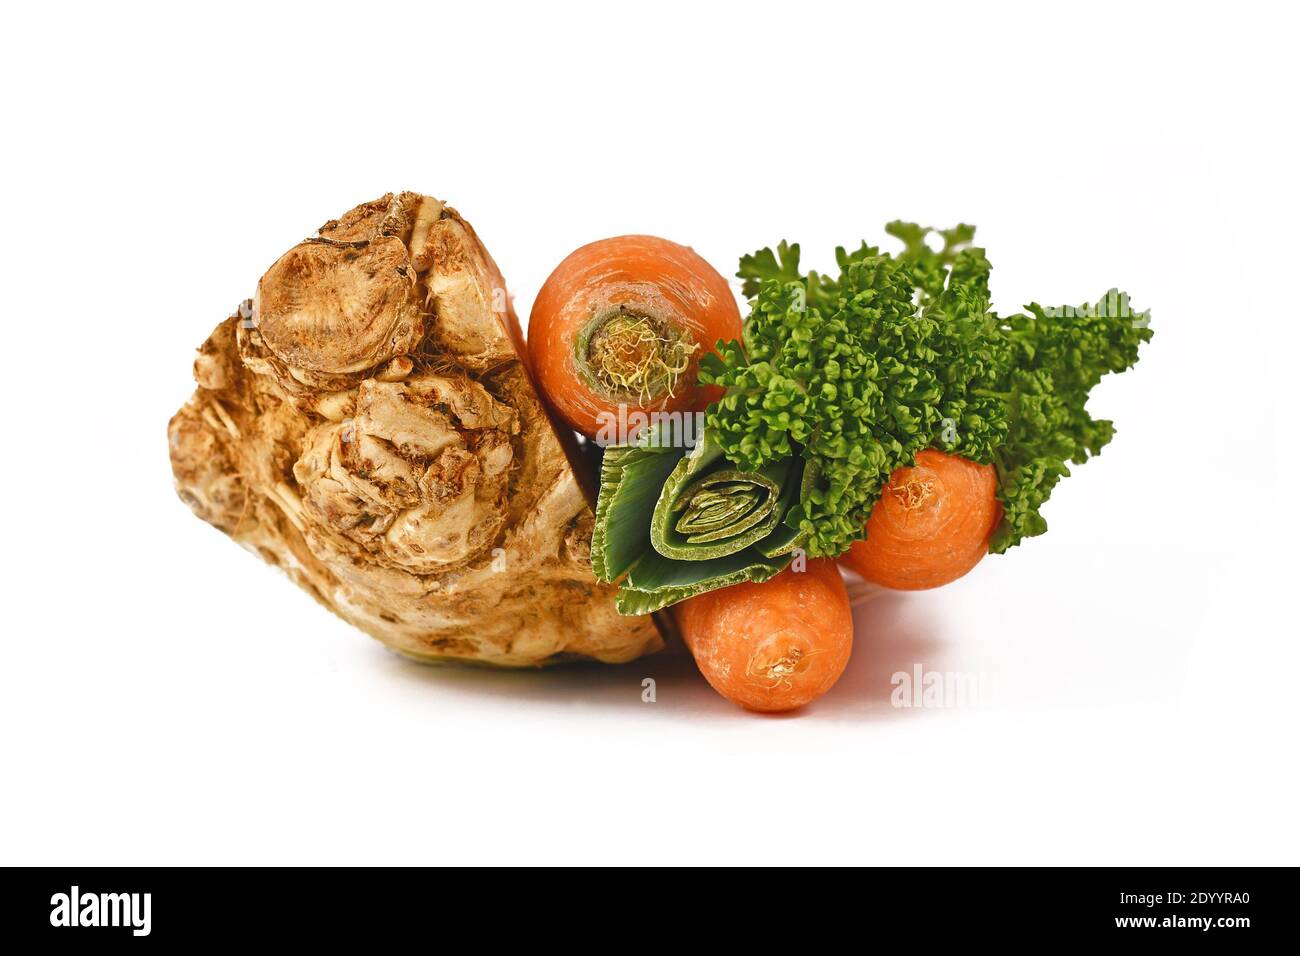 Bunch of soup vegetables containing carrots, leeks, parsley and celery root isolated on white background. Traditionally sold in bundles at German supe Stock Photo